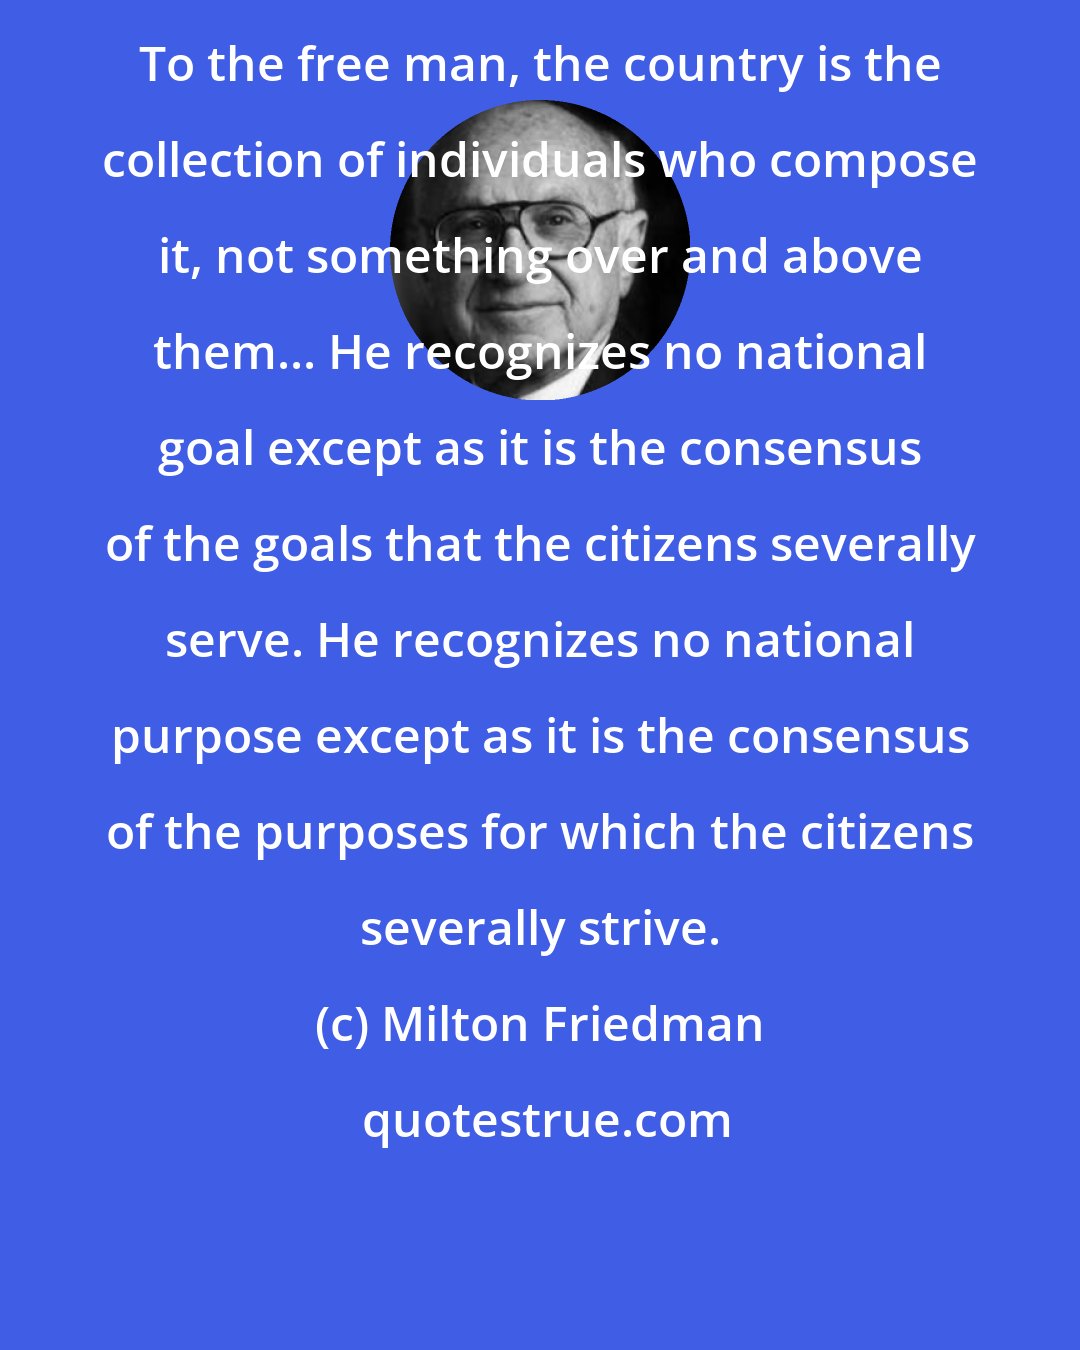 Milton Friedman: To the free man, the country is the collection of individuals who compose it, not something over and above them... He recognizes no national goal except as it is the consensus of the goals that the citizens severally serve. He recognizes no national purpose except as it is the consensus of the purposes for which the citizens severally strive.